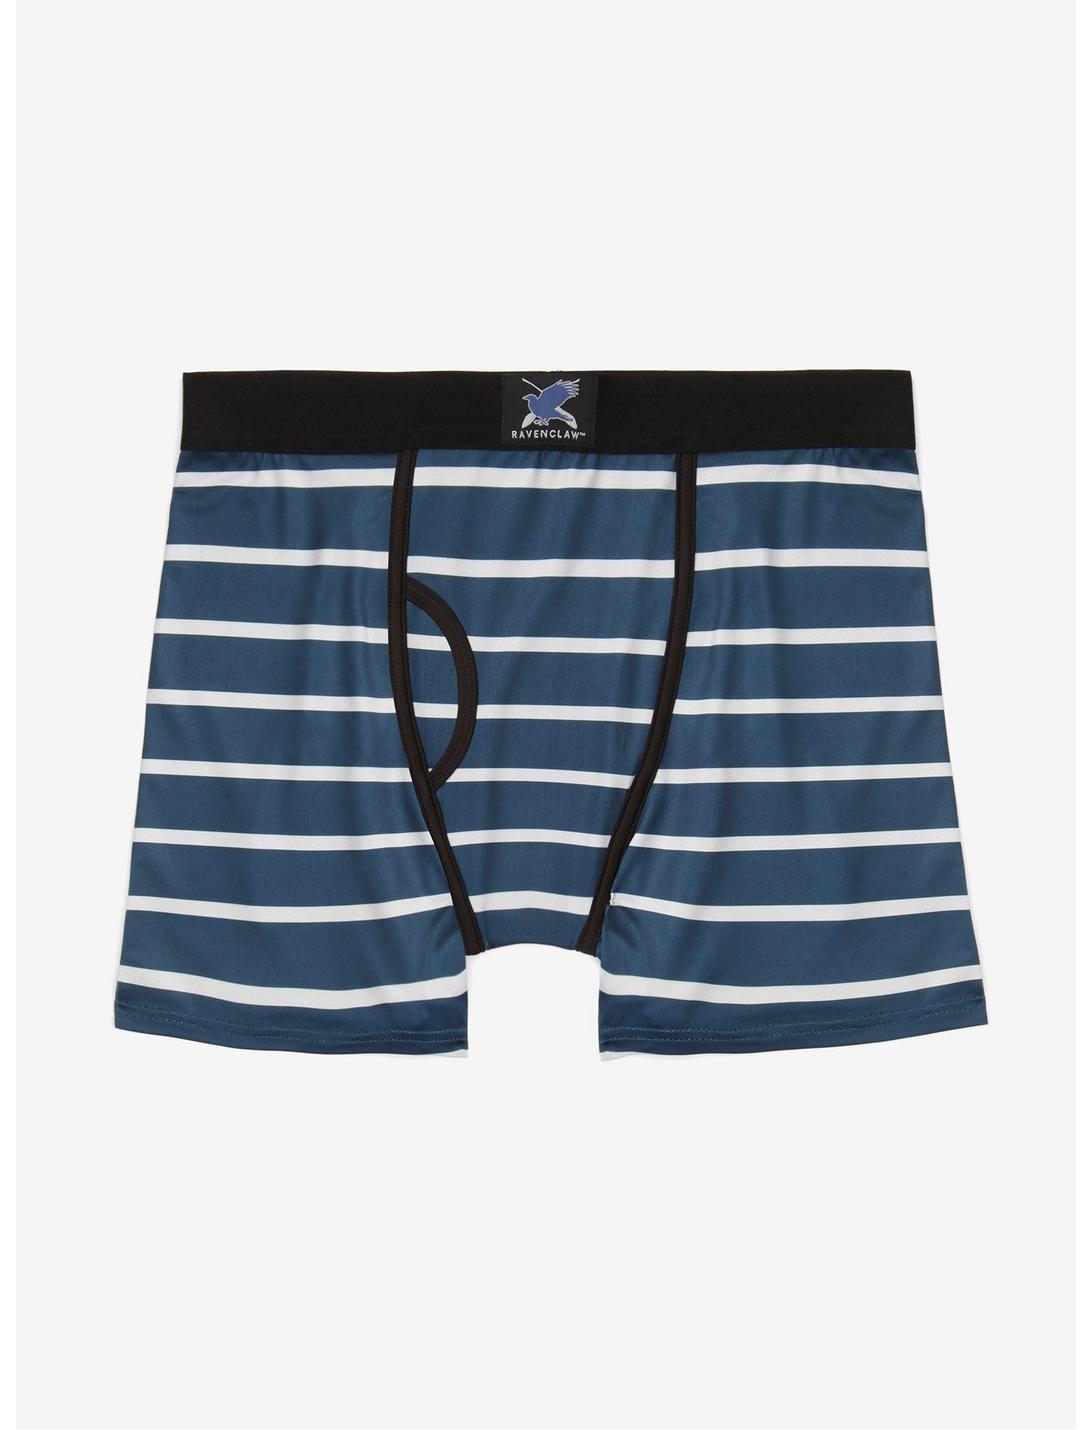 Harry Potter Ravenclaw Striped Boxer Briefs - BoxLunch Exclusive | BoxLunch